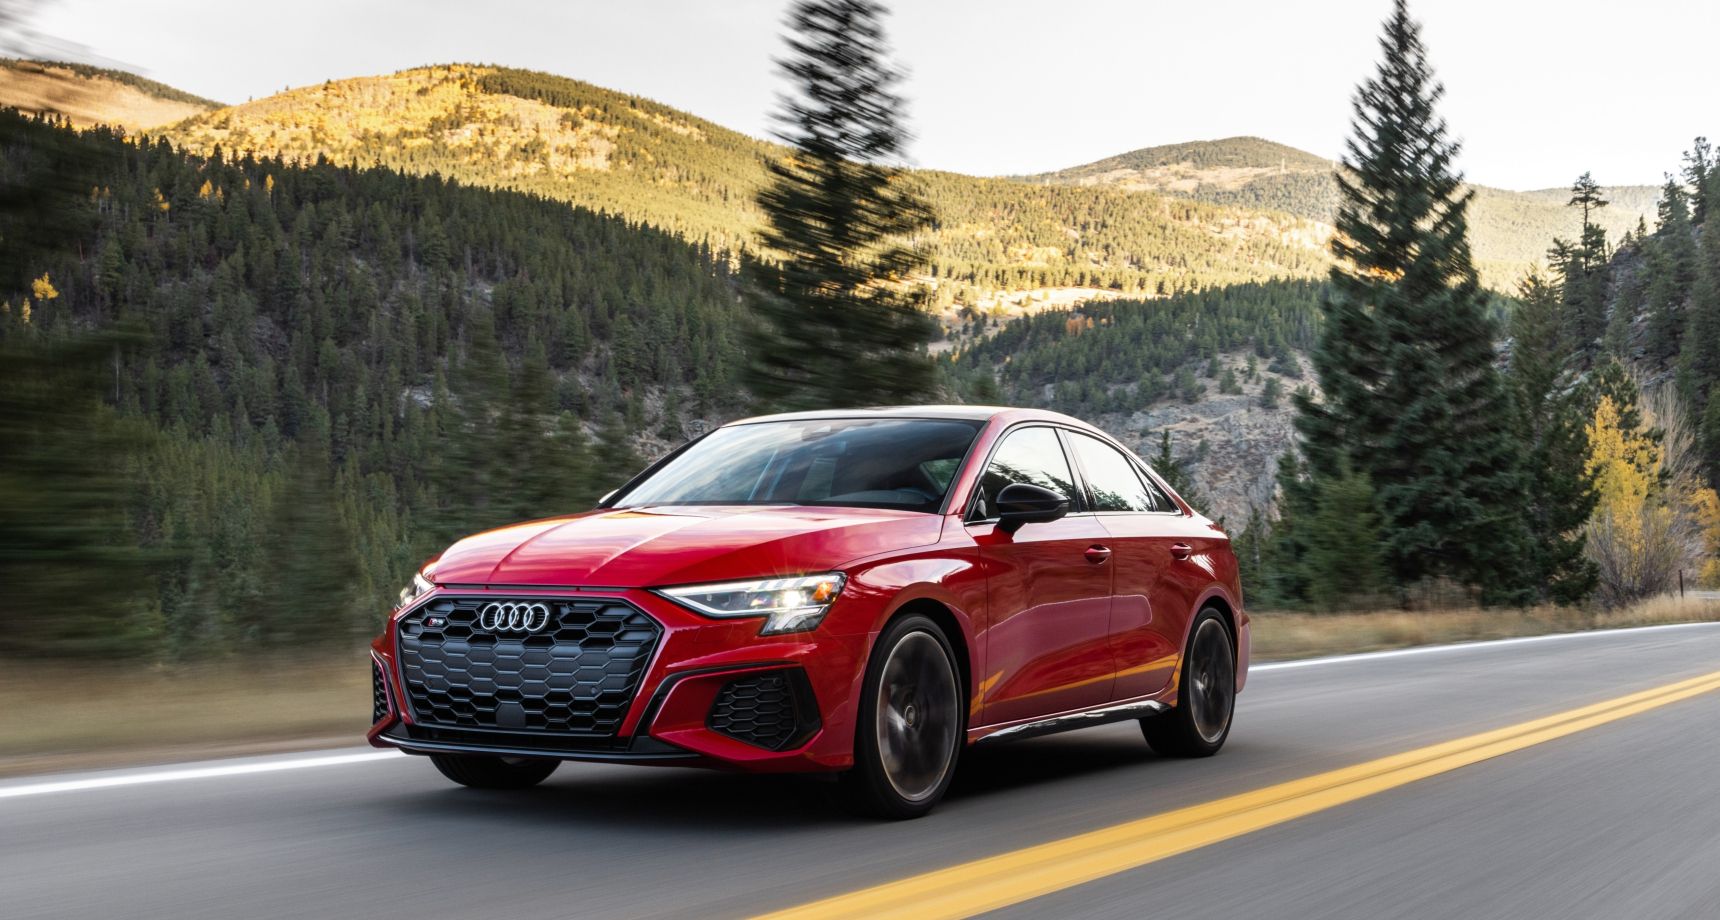 https://www.hotcars.com/how-fast-can-a-stage-2-audi-rs3-even-go/